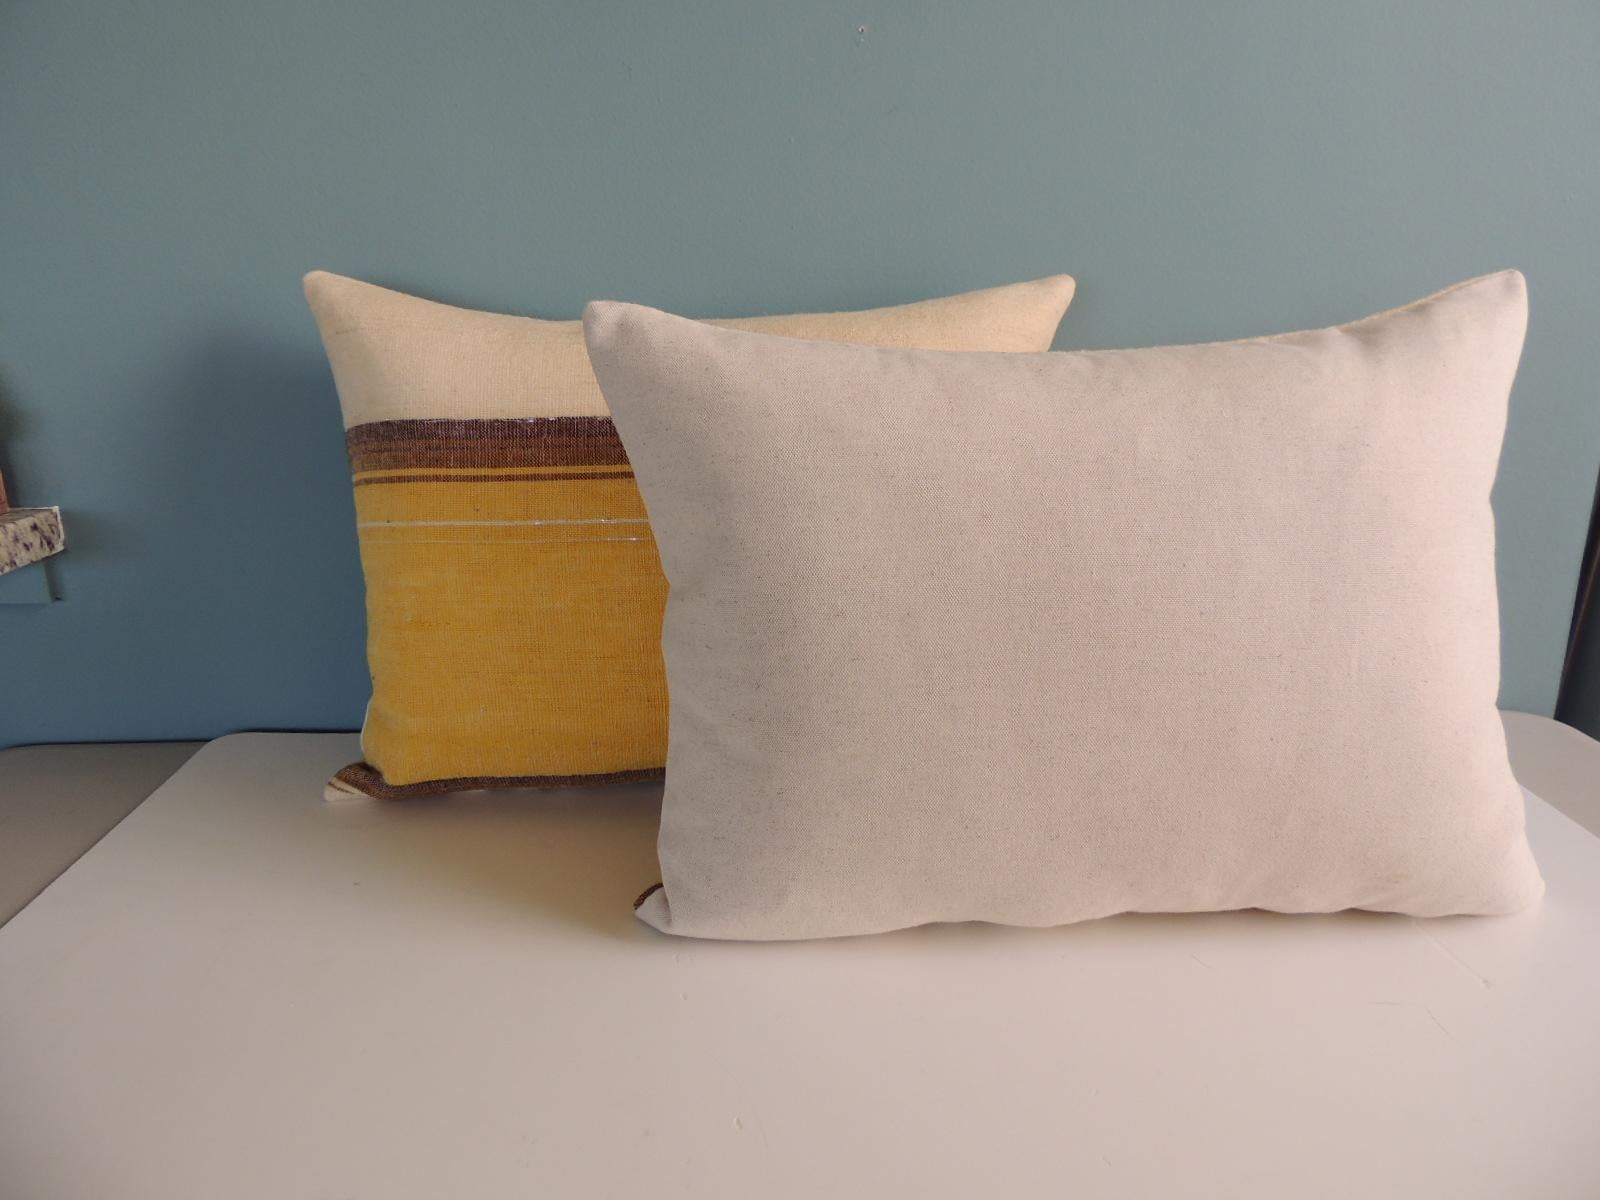 Hand-Crafted Pair of Decorative Bolster Pillows